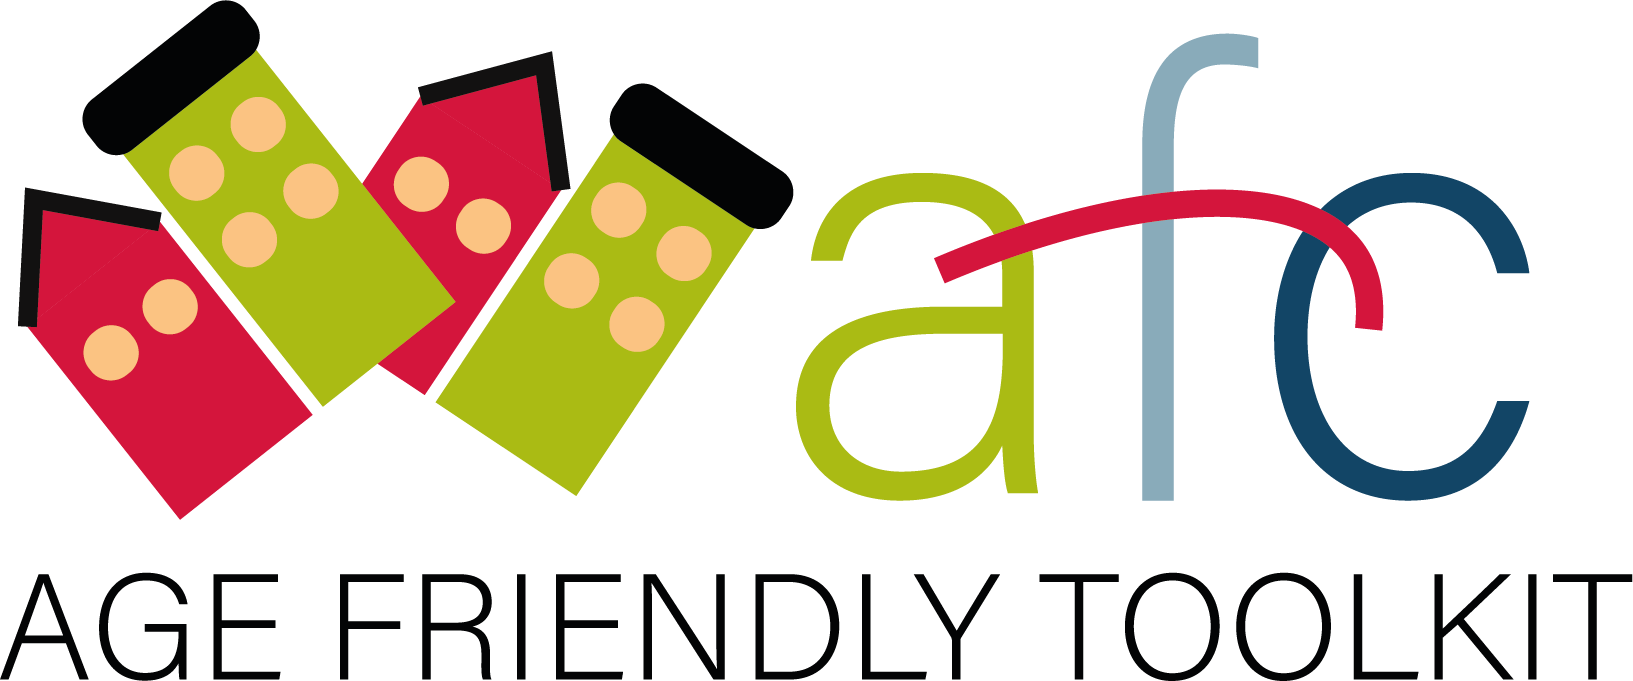 Age-Friendly City Toolkit